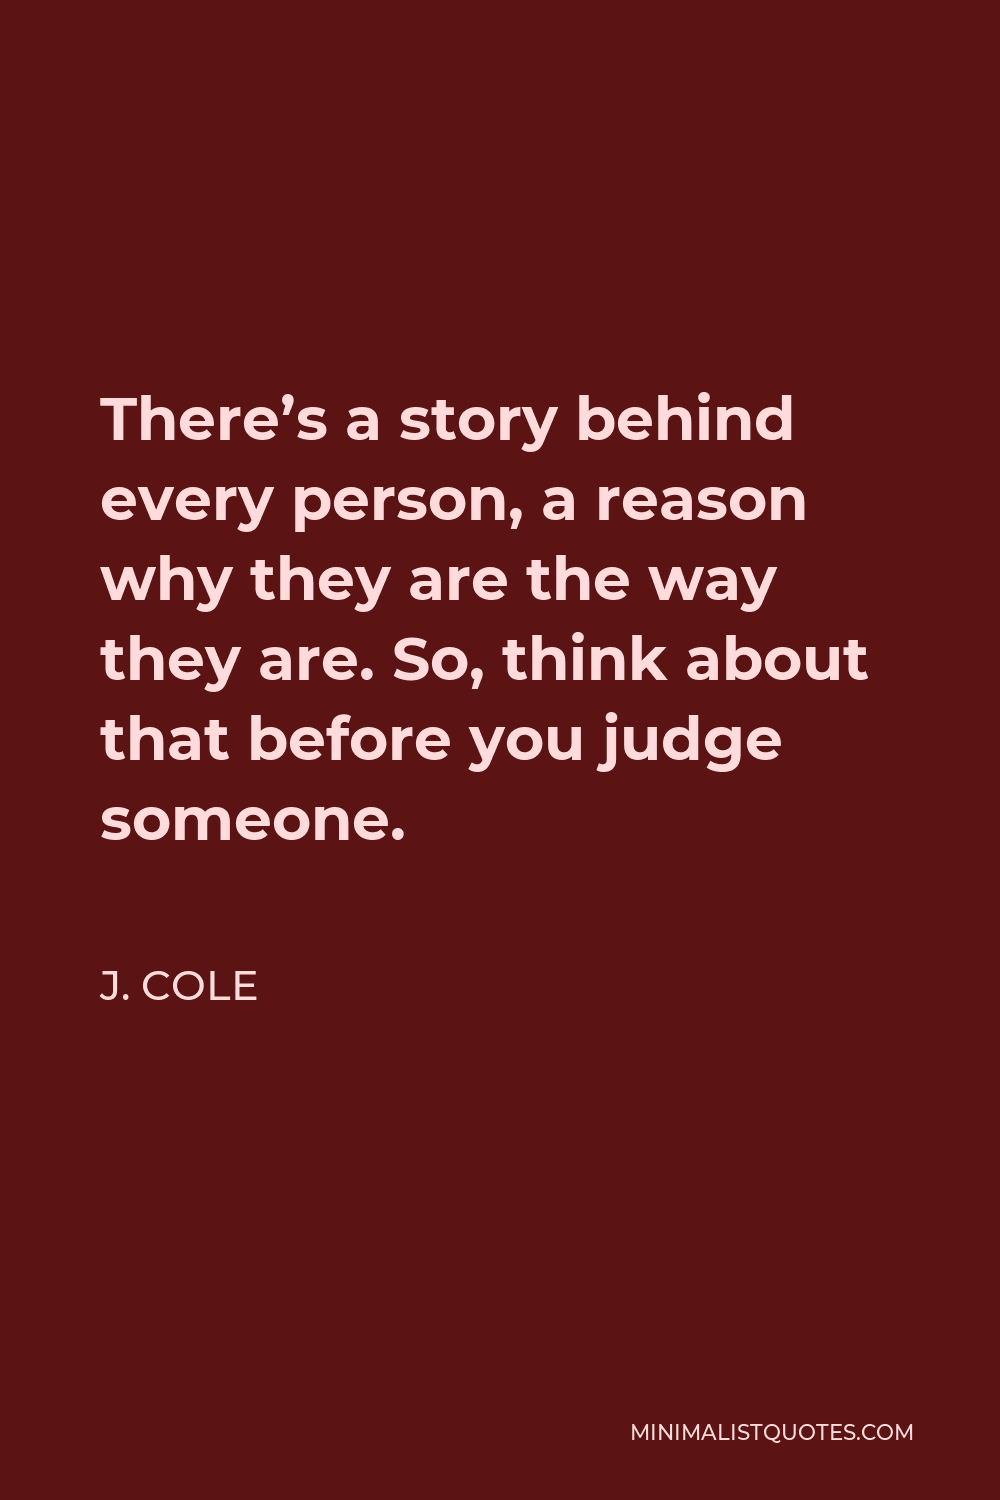 J. Cole Quote - There’s a story behind every person, a reason why they are the way they are. So, think about that before you judge someone.